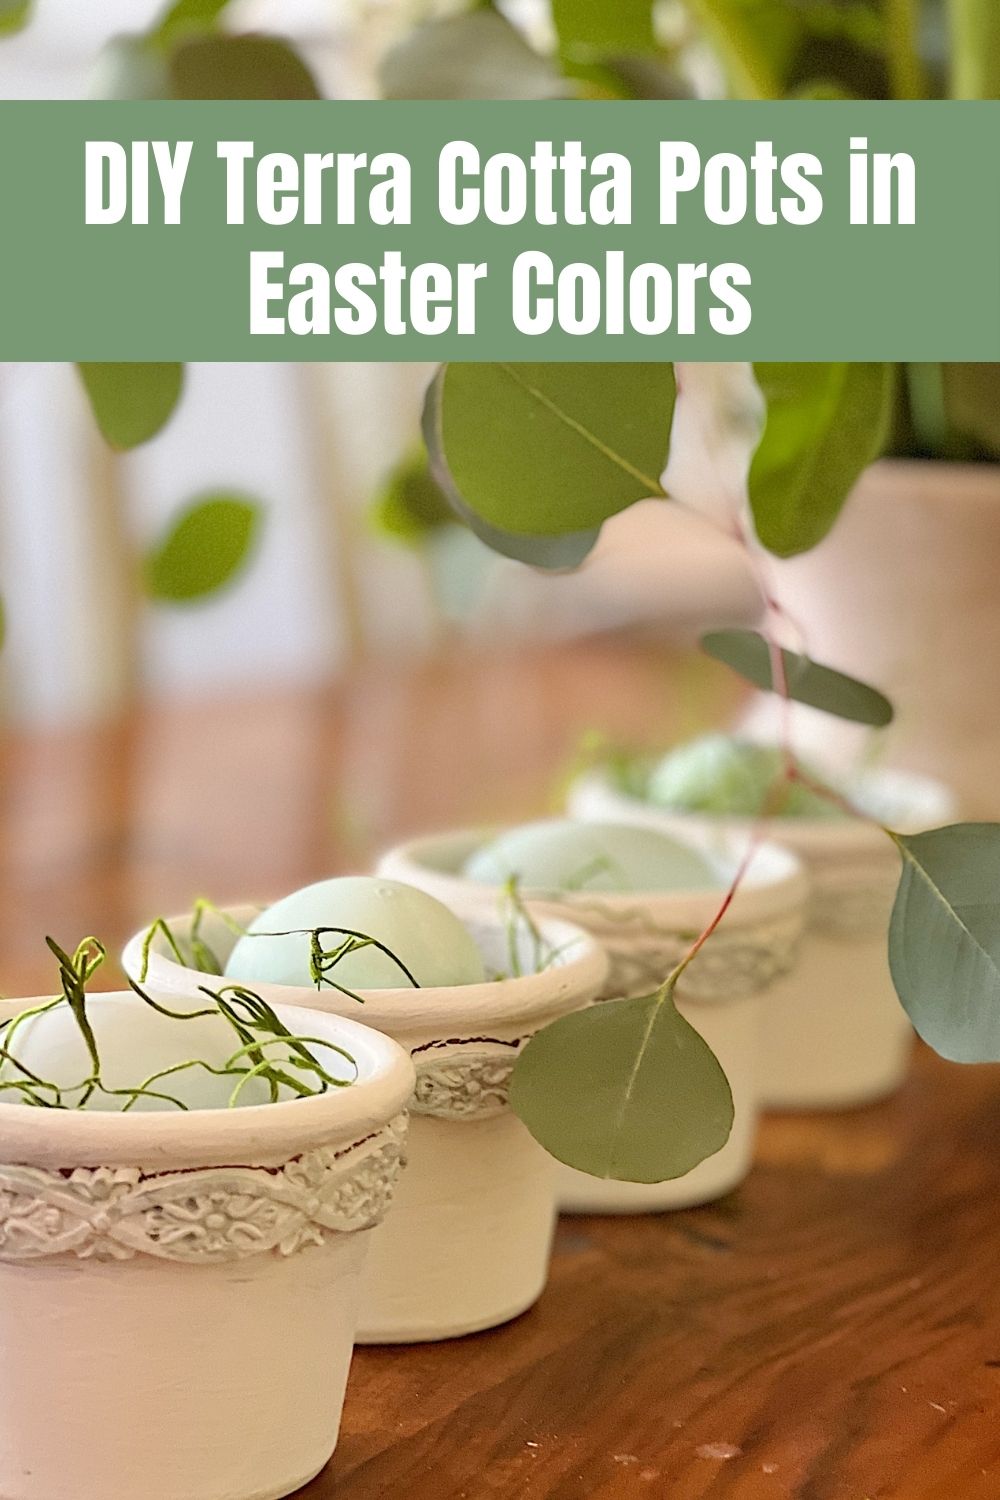 Easter colors are so beautiful. These DIY terra cotta pots and Easter eggs were inspired by these gorgeous colors of spring.